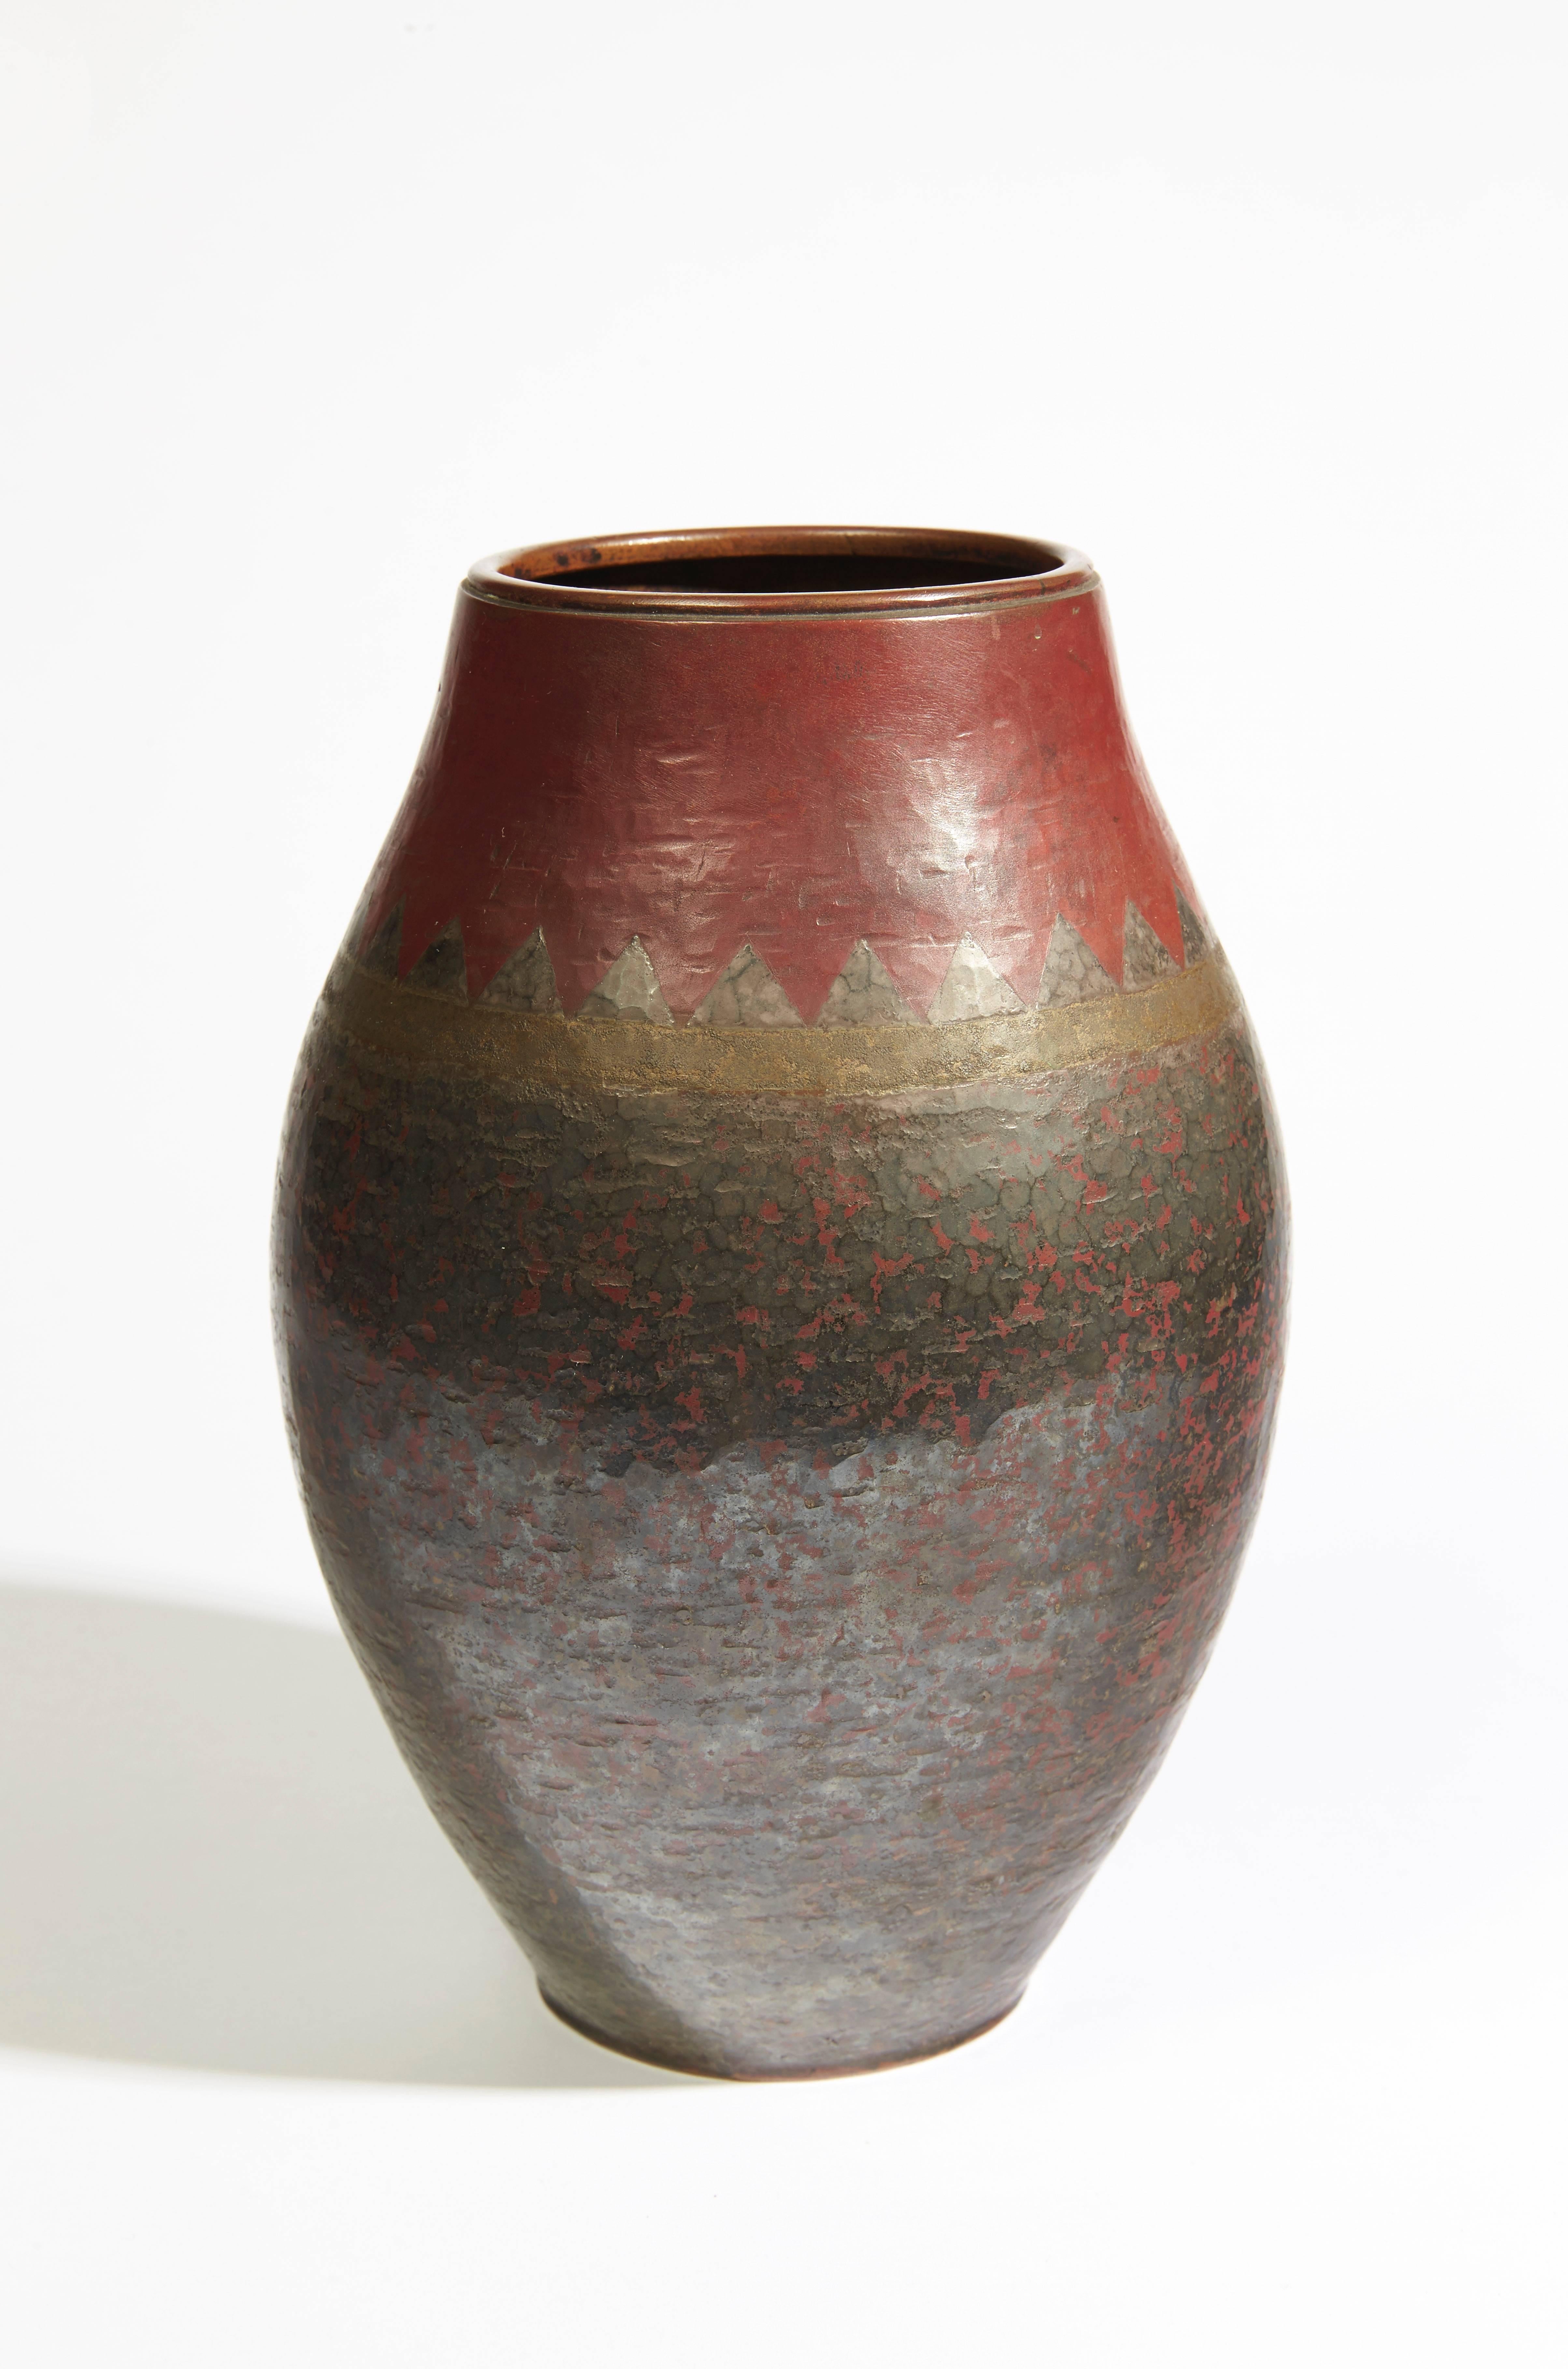 Vase in copper Dinanderie with geometrical decoration.
Signed CL-LINOSSIER under the base and numbered MA 343.